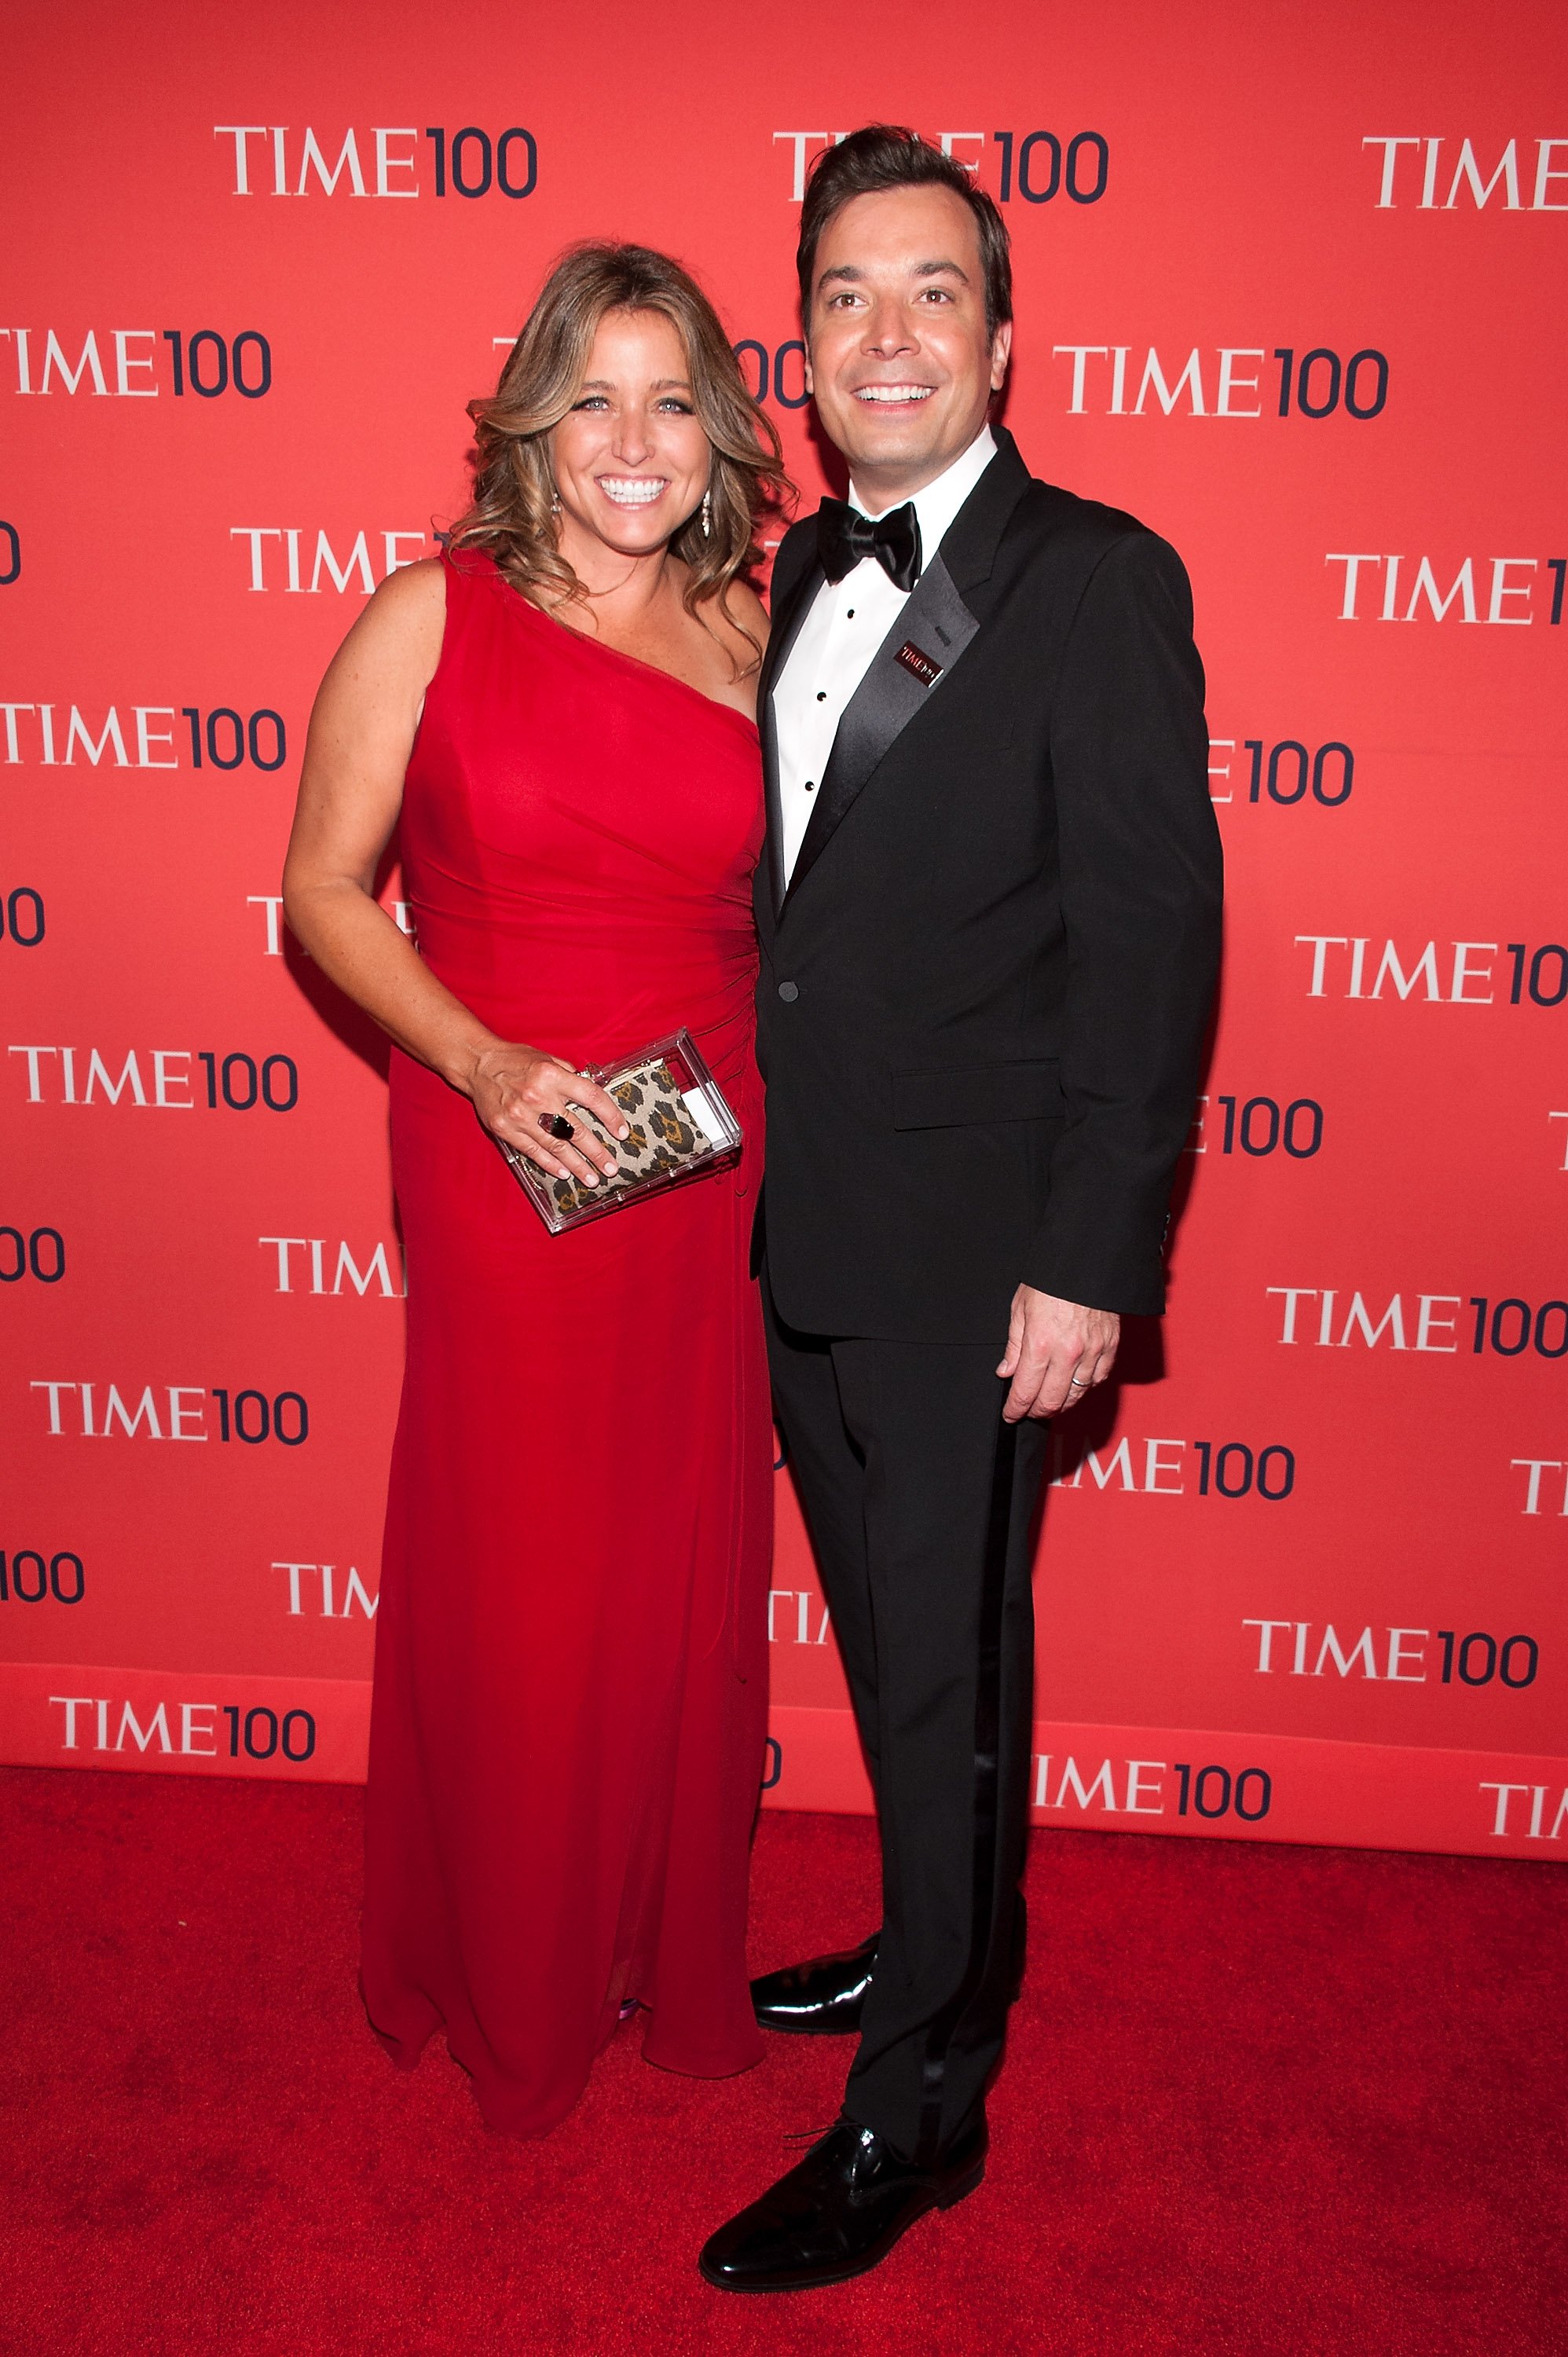 Jimmy Fallon and wife Nancy Juvonen attend the 2013 Time 100 Gala at Frederick P. Rose Hall, Jazz on April 23, 2013 | Photo: Getty Images